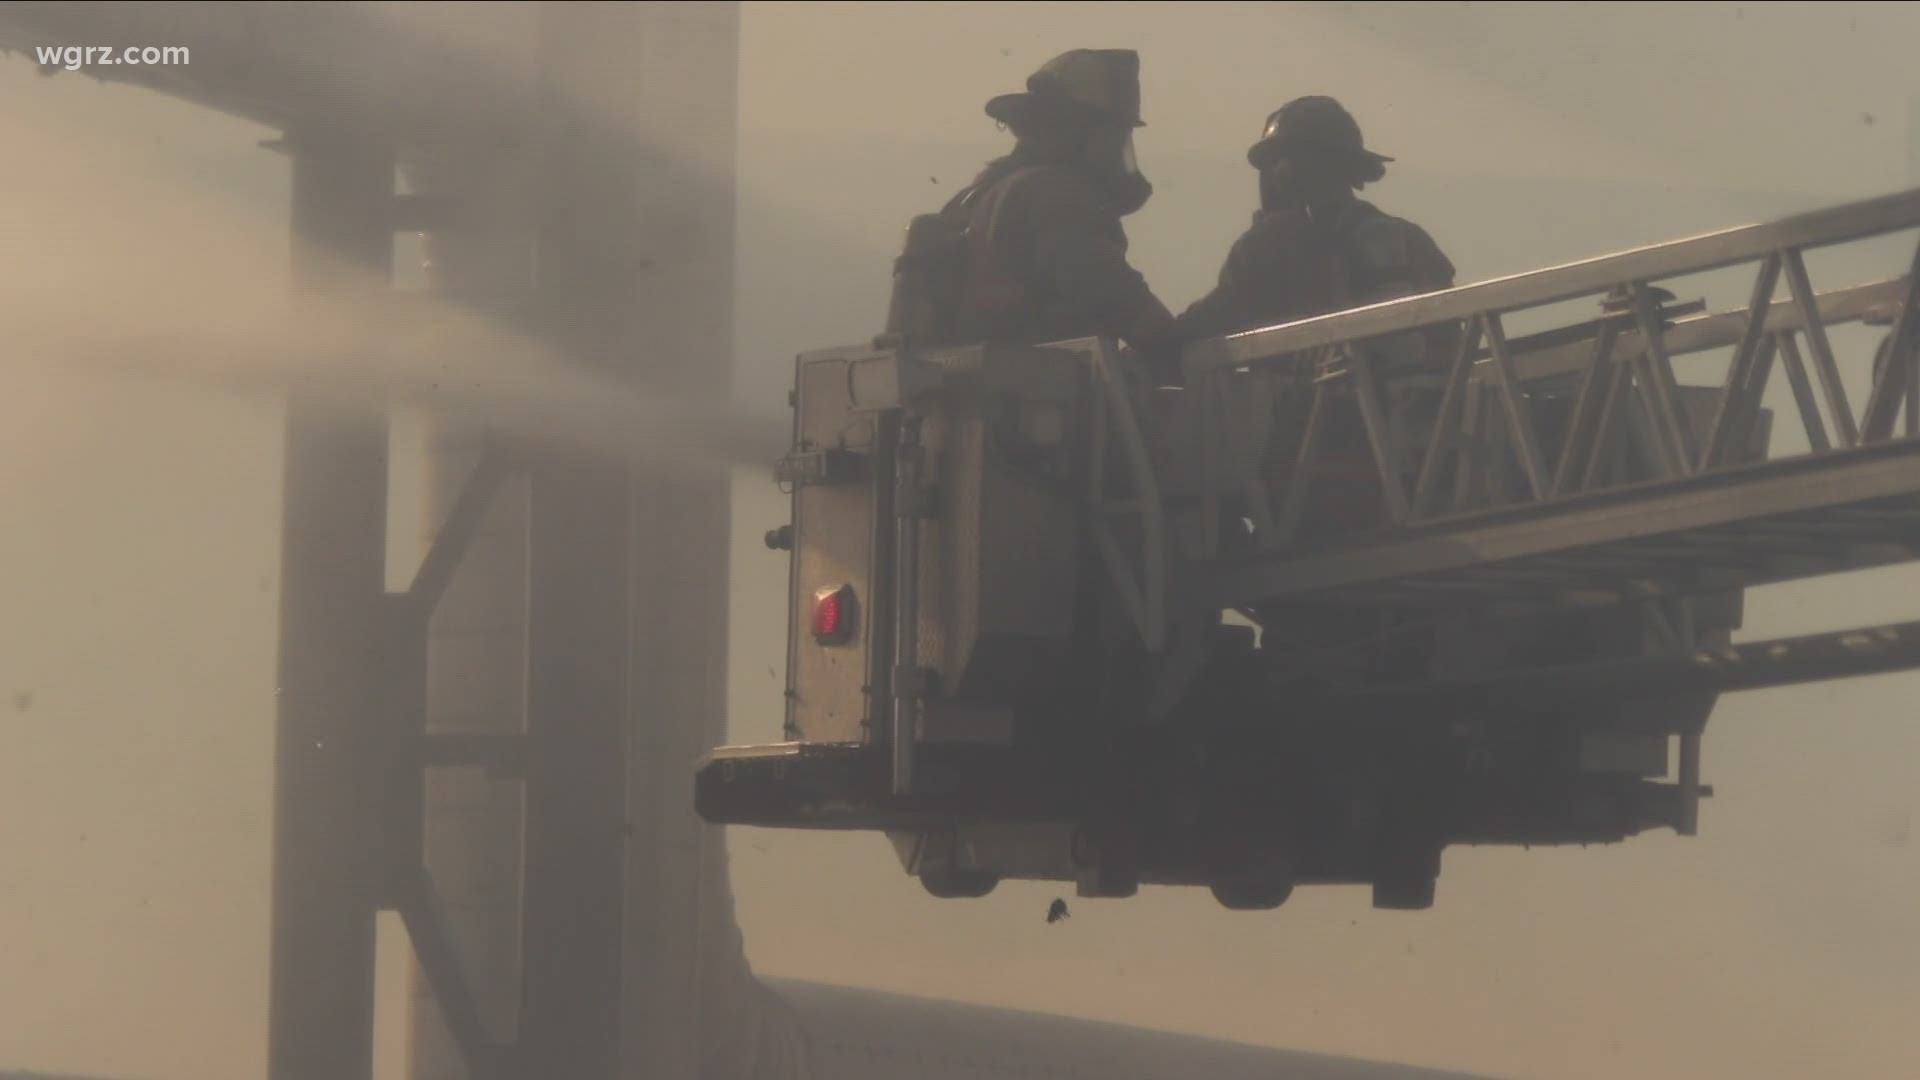 Today's high winds made things tough for crews responding to a massive fire at a paper and cardboard factory in Niagara Falls.